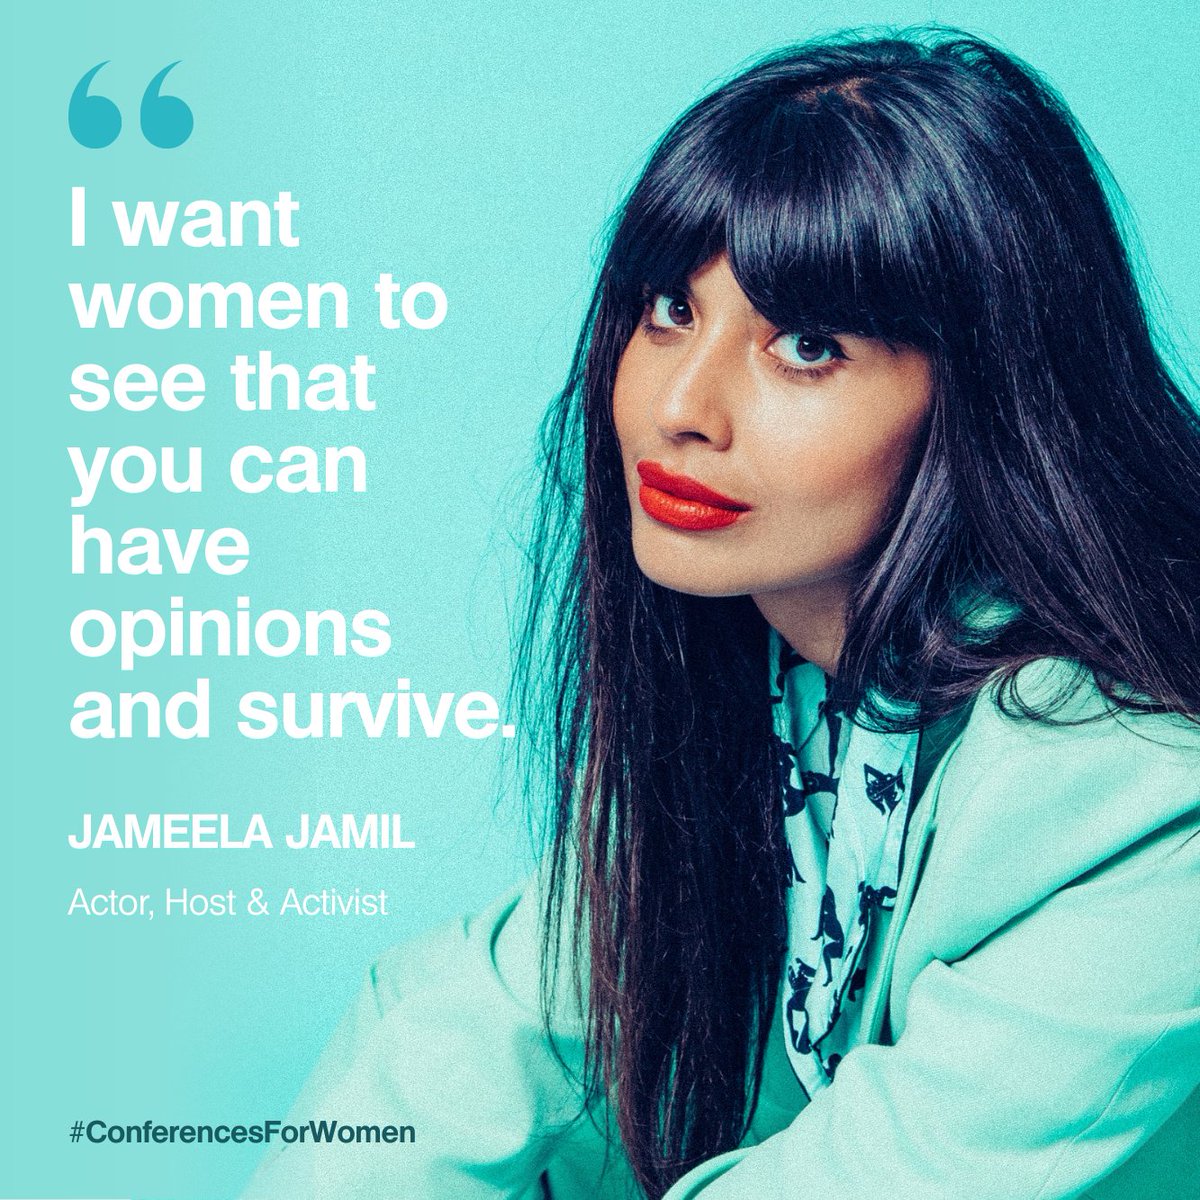 'It’s all survivable.'

Jameela Jamil won’t be silenced by vilification. Her boldness in the face of adversity is a powerful reminder for all of us.

Read @jameelajamil's interview with the #ConferencesForWomen:  bit.ly/3vlZSDF

#AAPIHeritageMonth #MentalHealthMonth